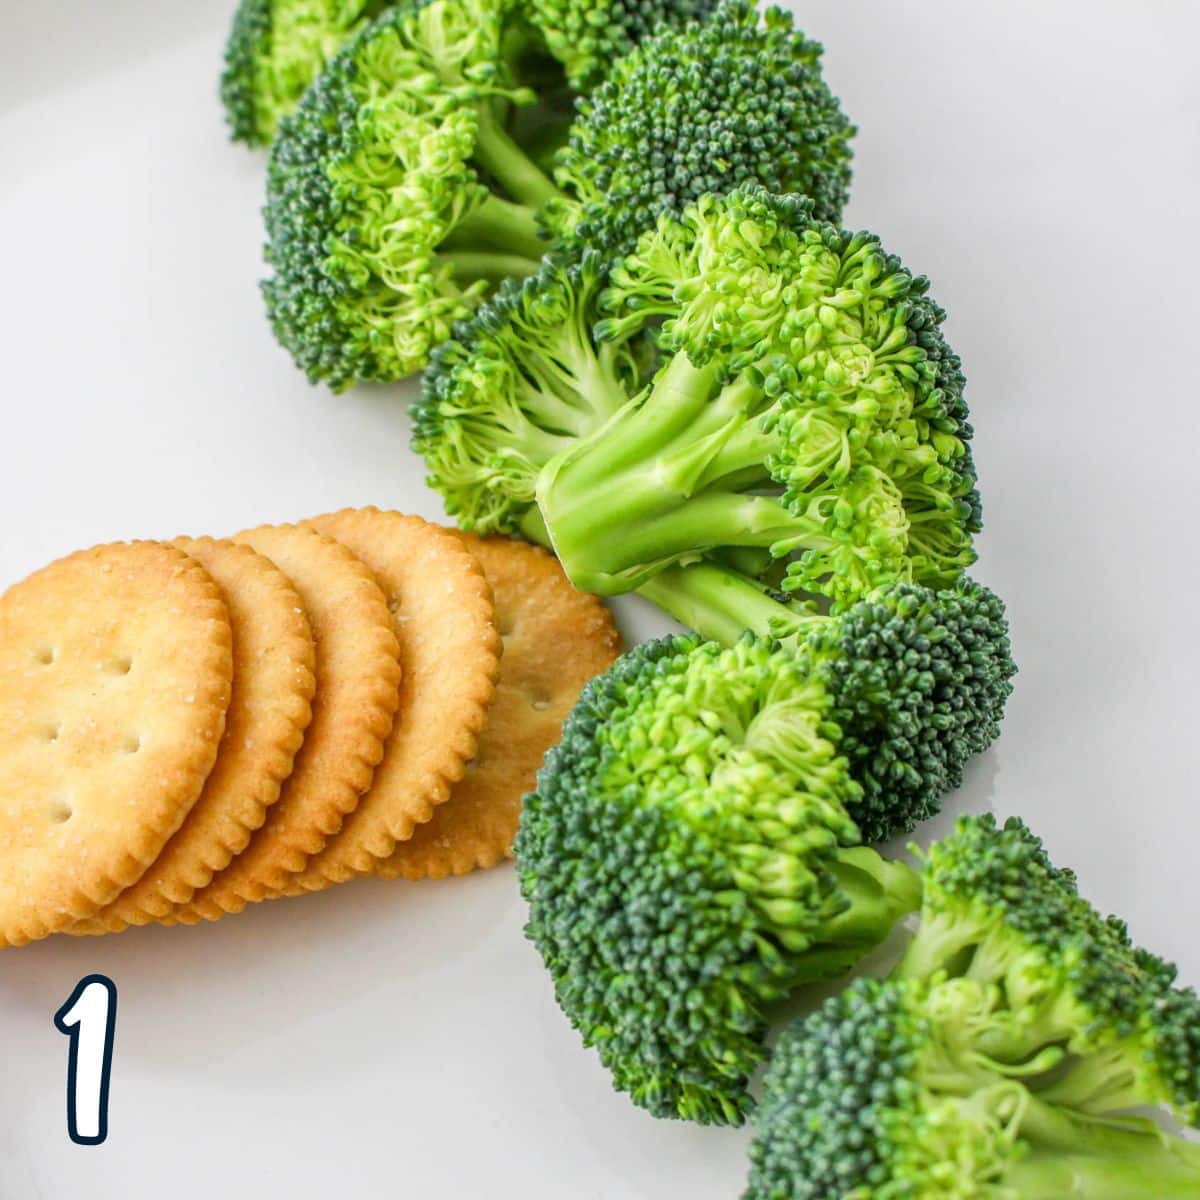 A plate with broccoli and crackers on it.